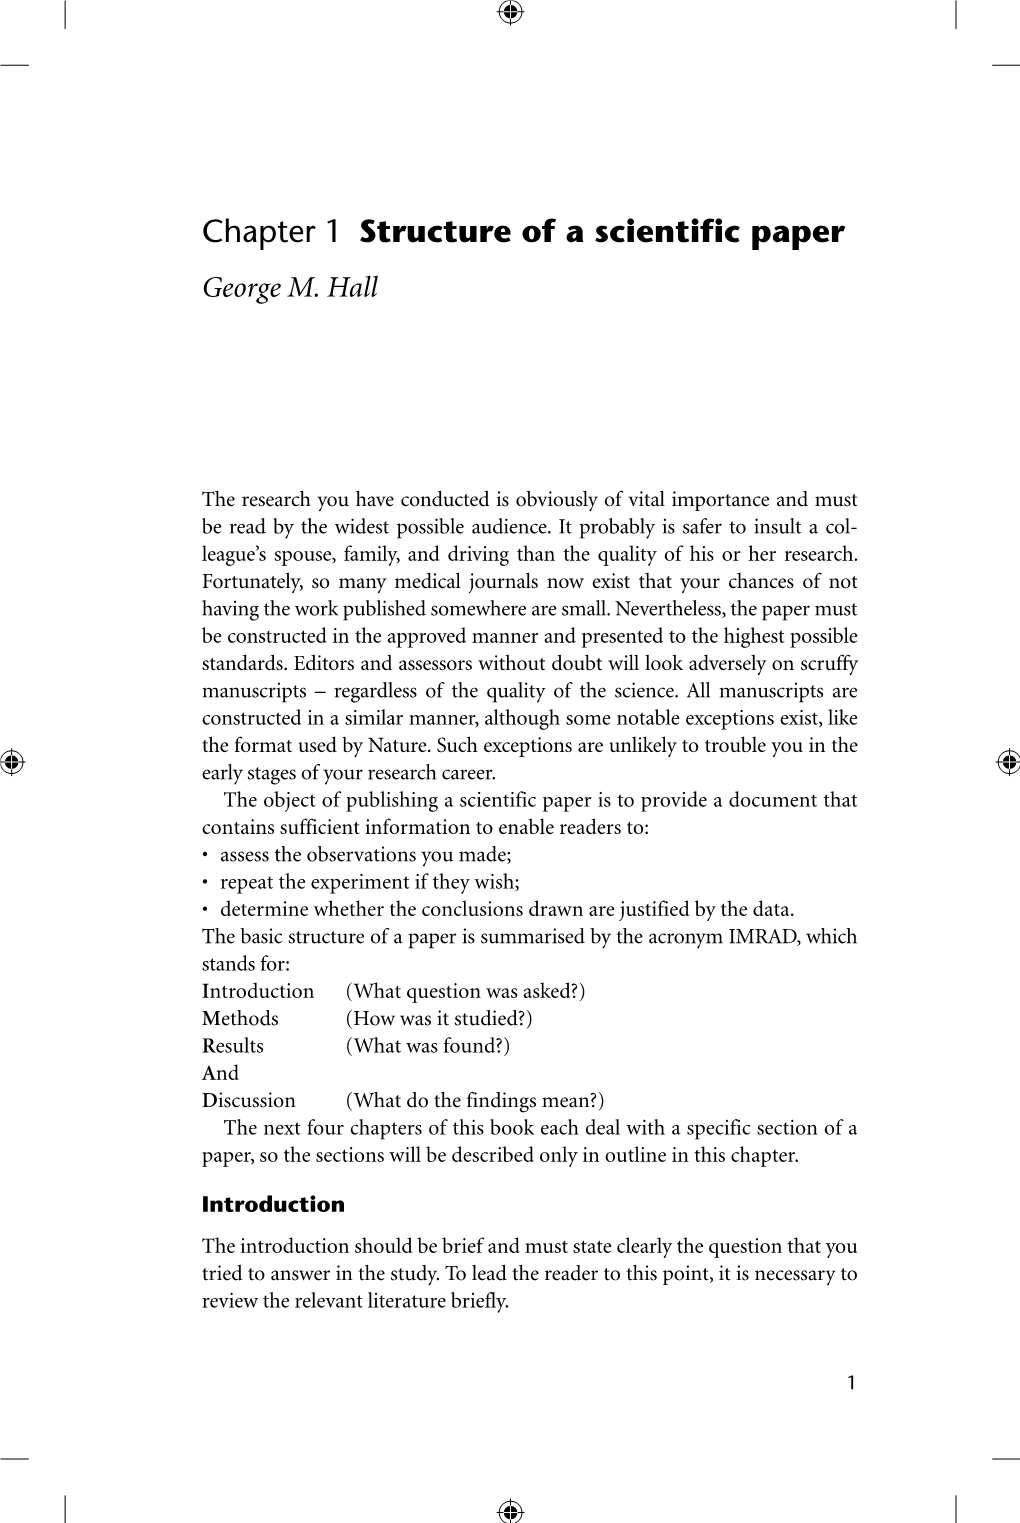 Chapter 1 Structure of a Scientific Paper George M